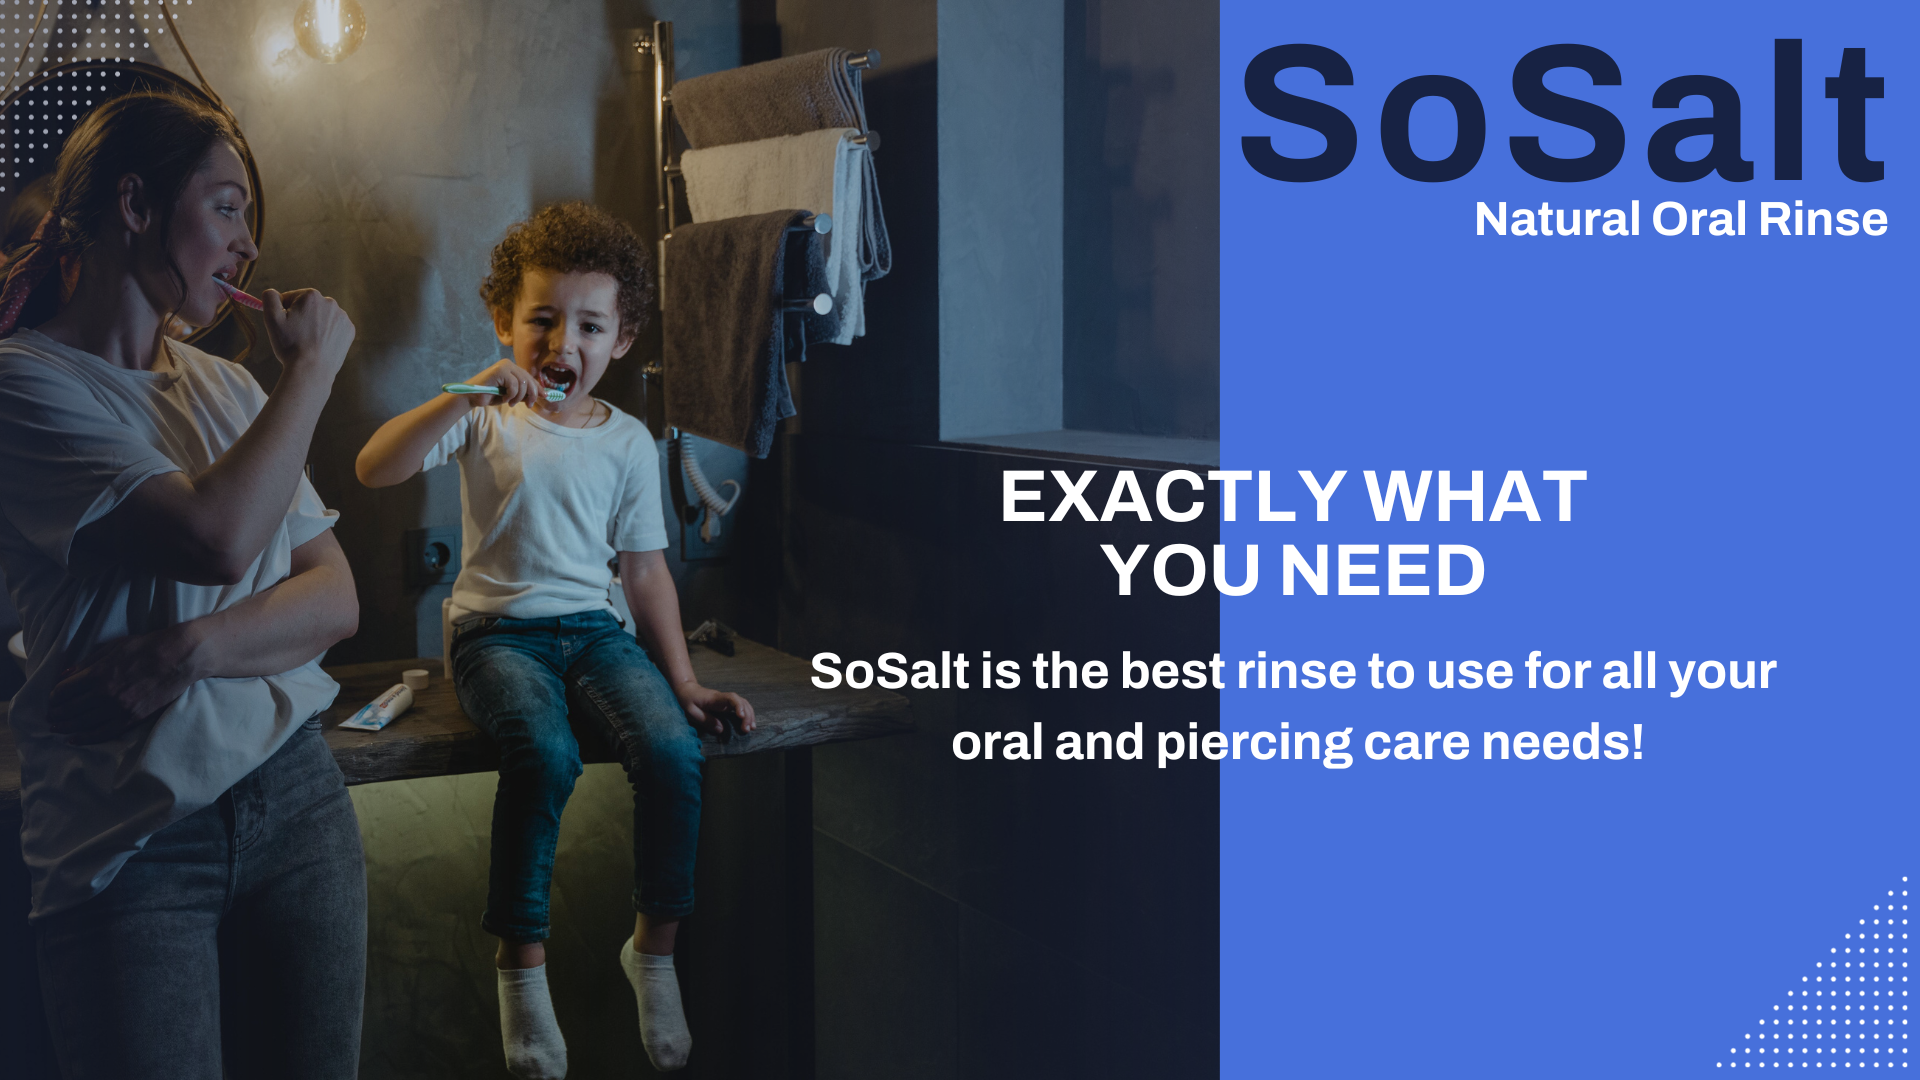 Load video: SoSalt a #natural rinse for oral and piercing care that disinfects to help eliminate infections.